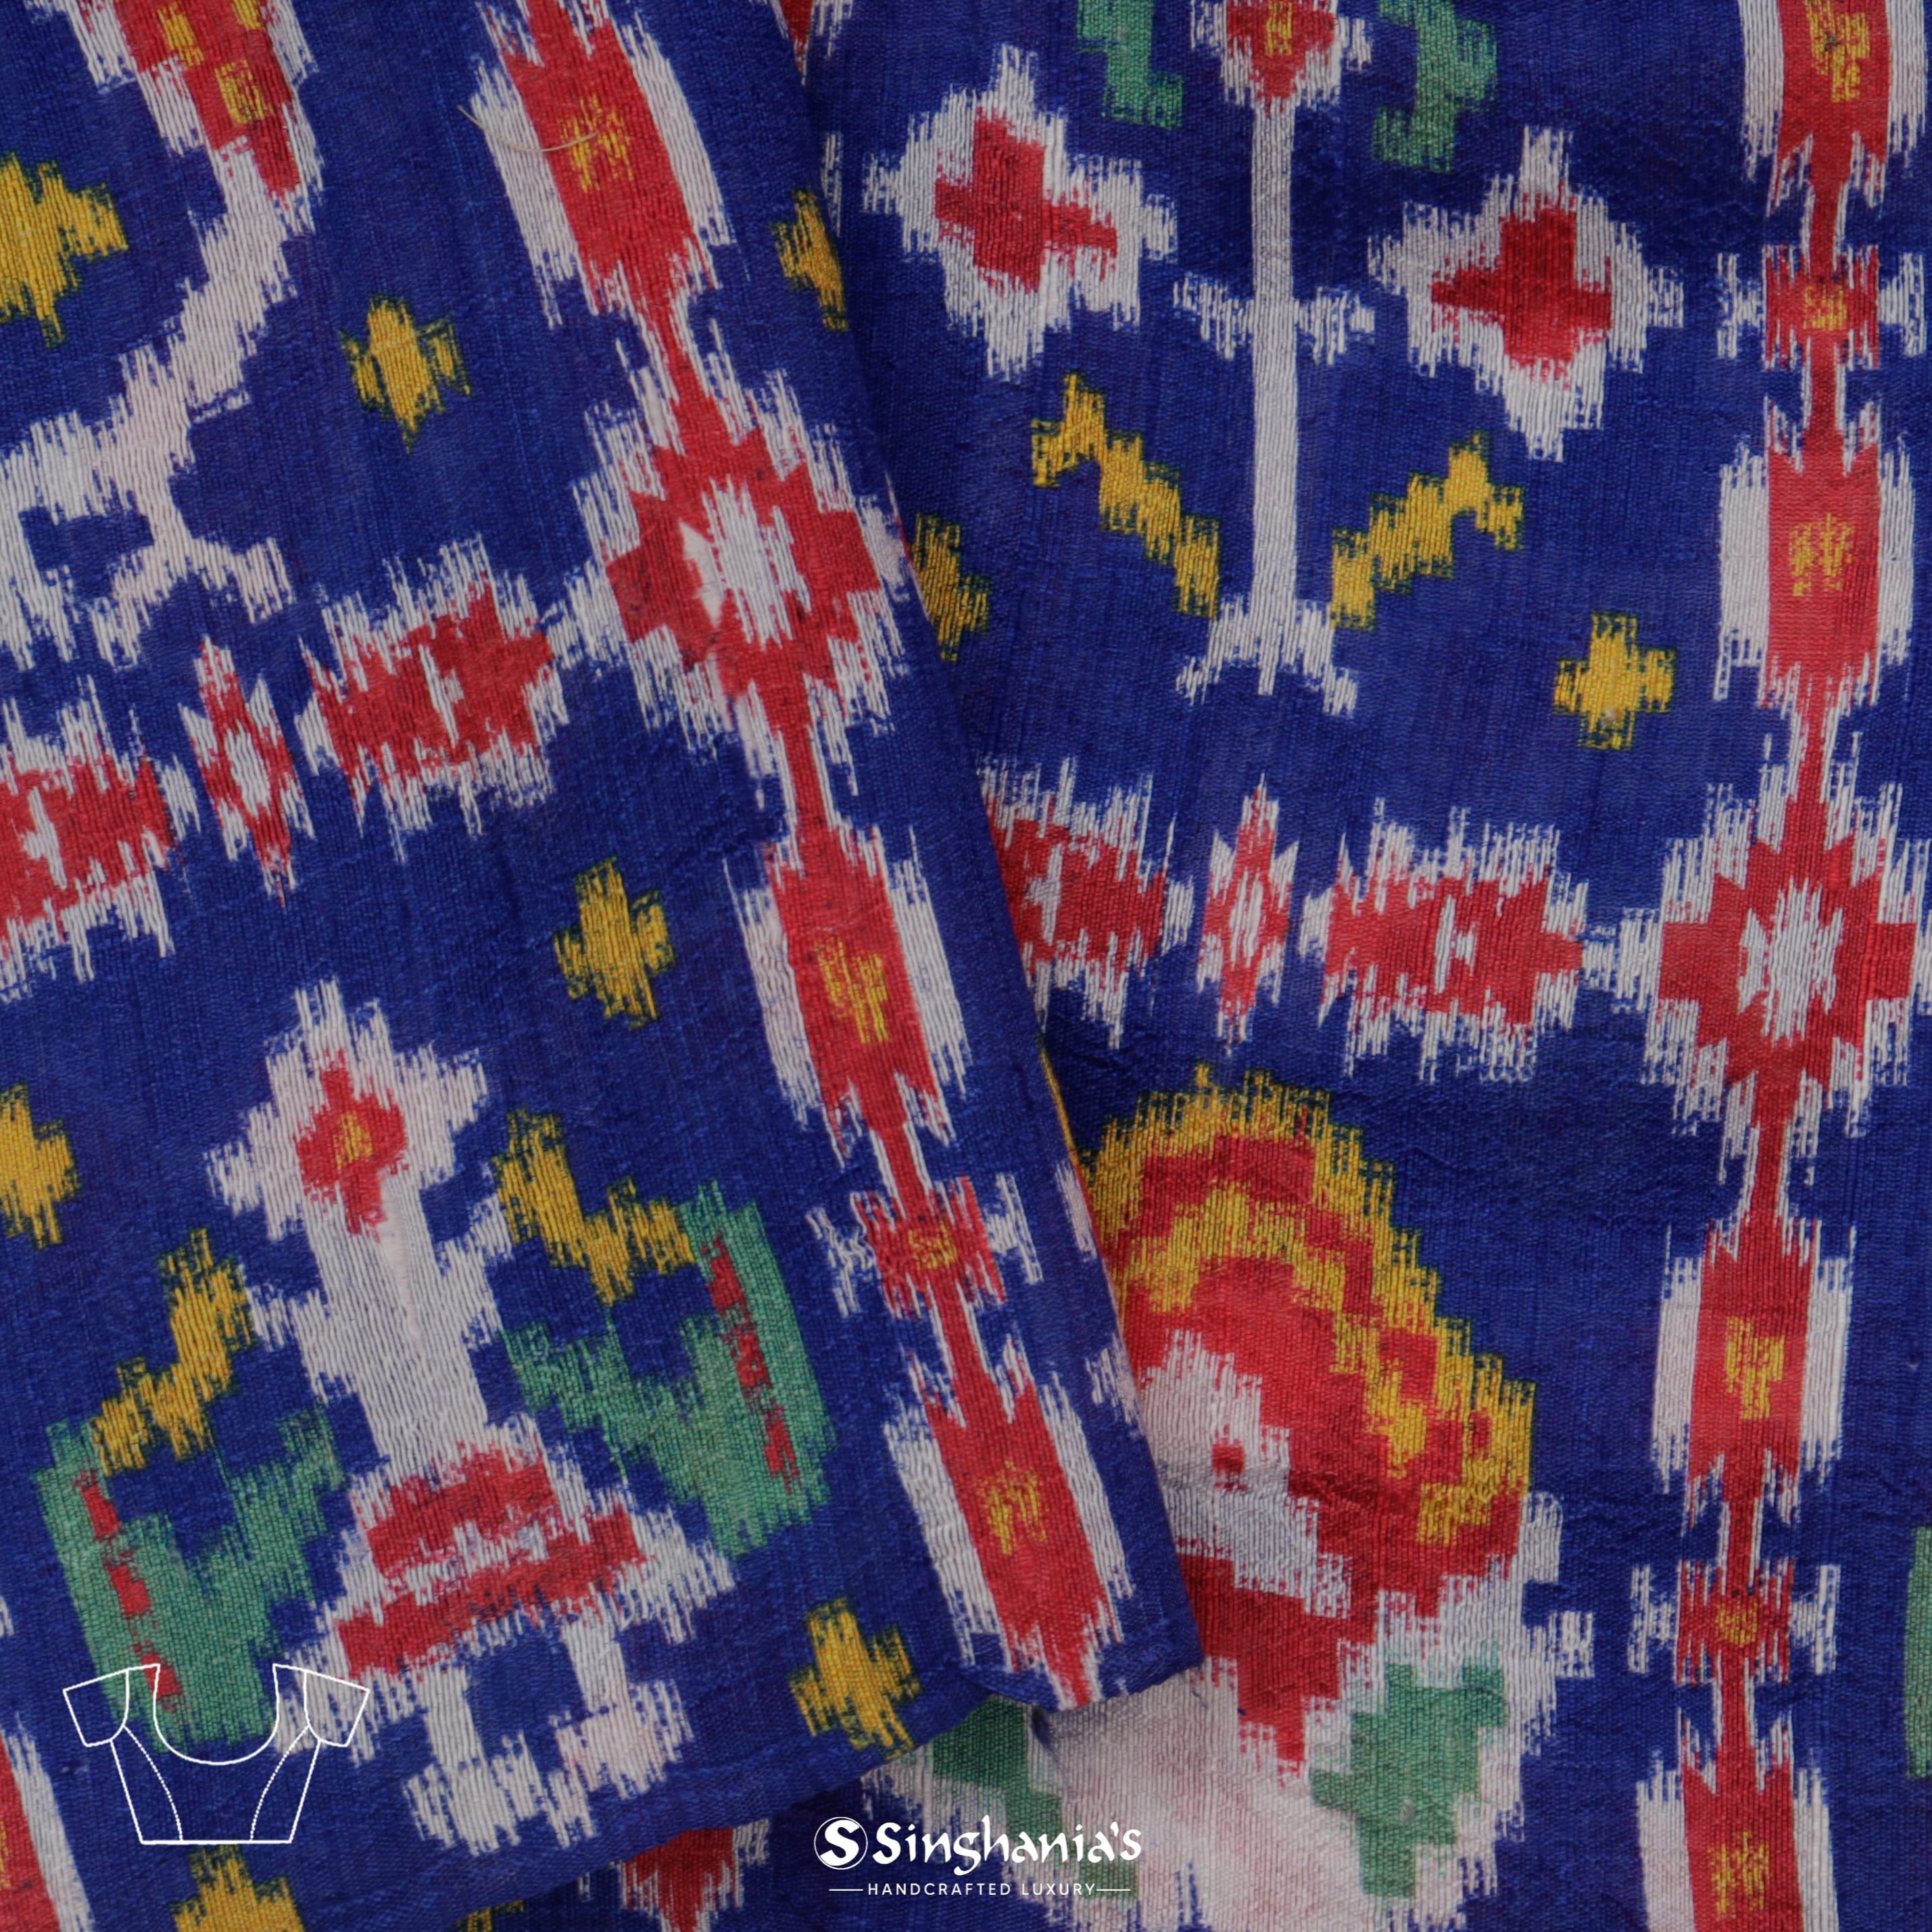 Midnight Blue Matka Printed With Floral Printed Motifs